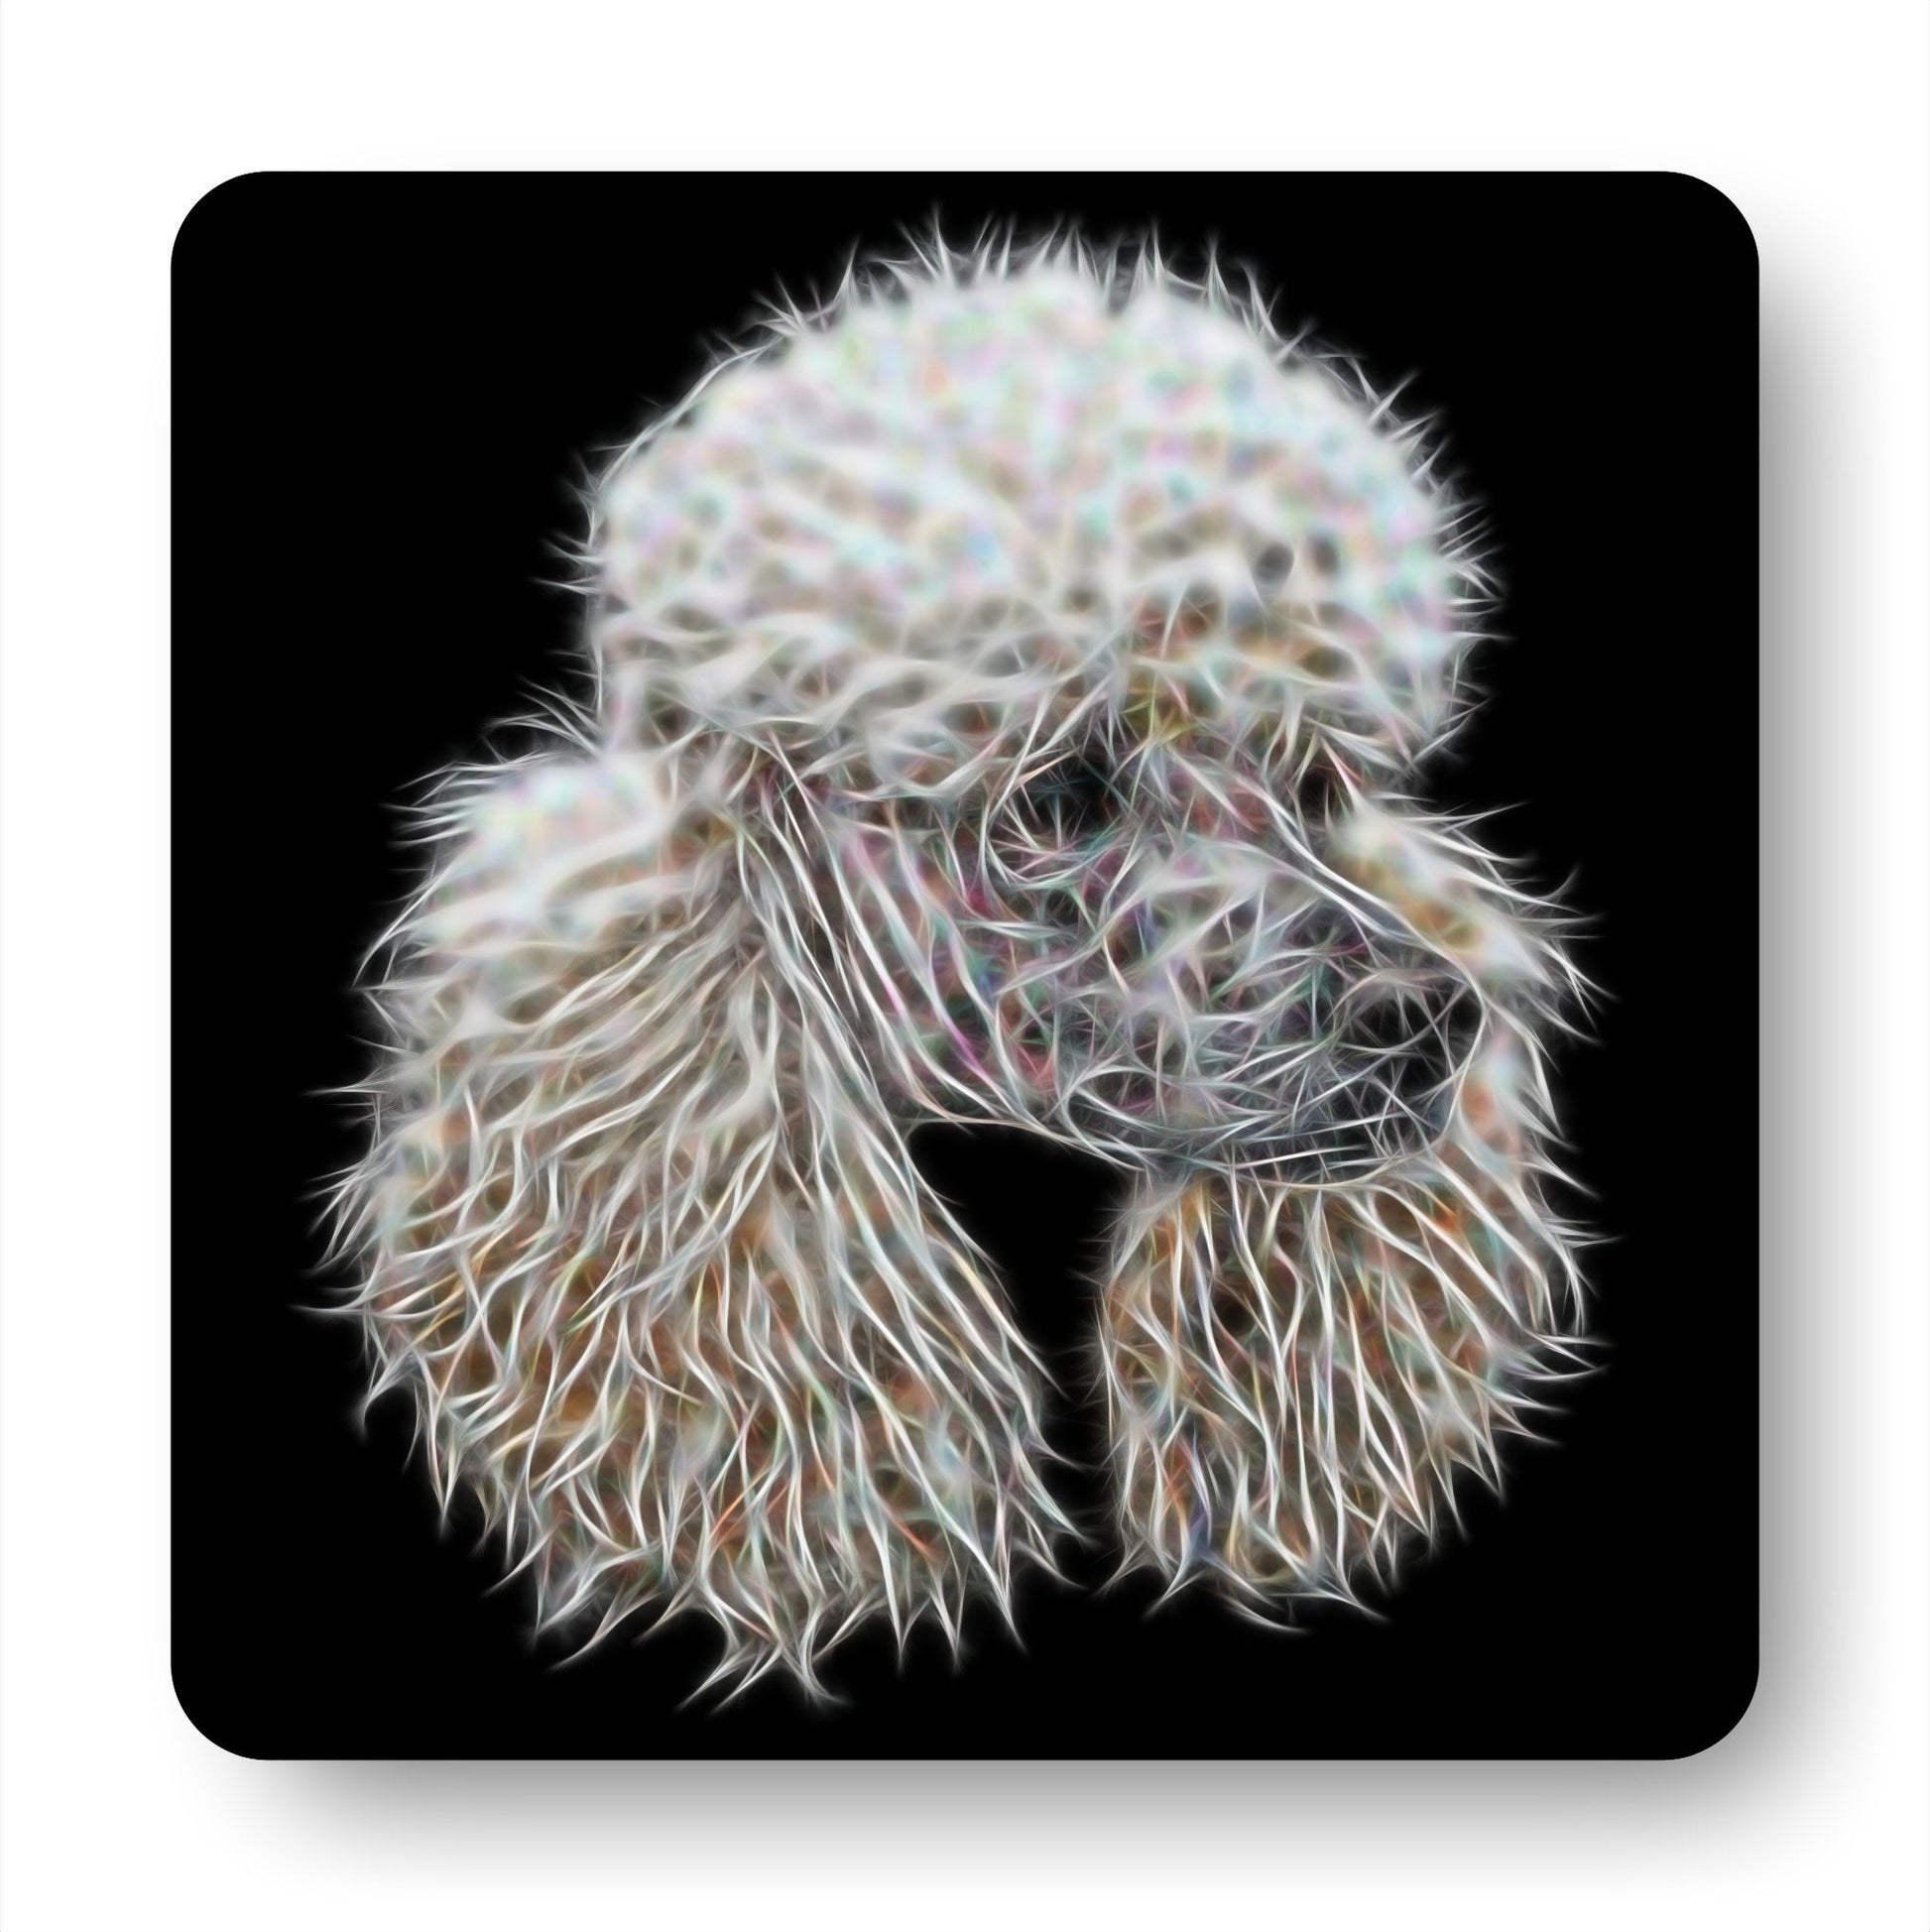 White Standard Poodle Coasters, Set of 2, with Stunning Fractal Art Design. Perfect Poodle Owner Gift.